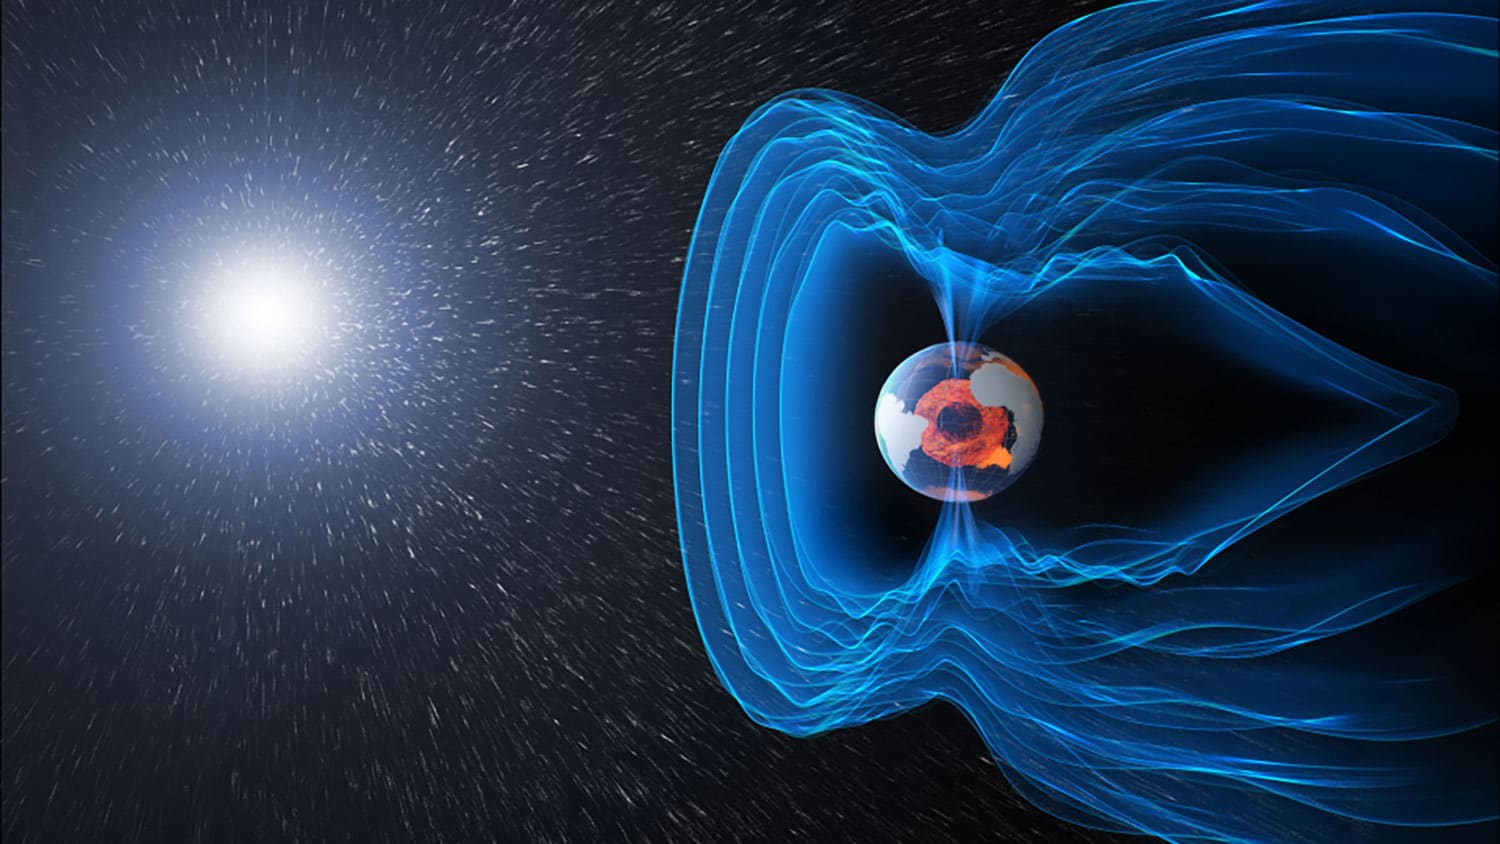 Illustration of earth's magnetic field